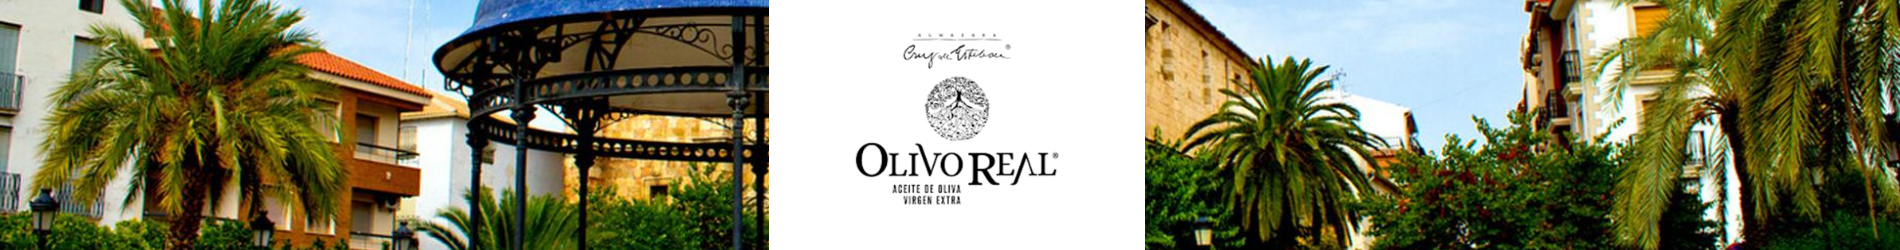 banner_olivo_real